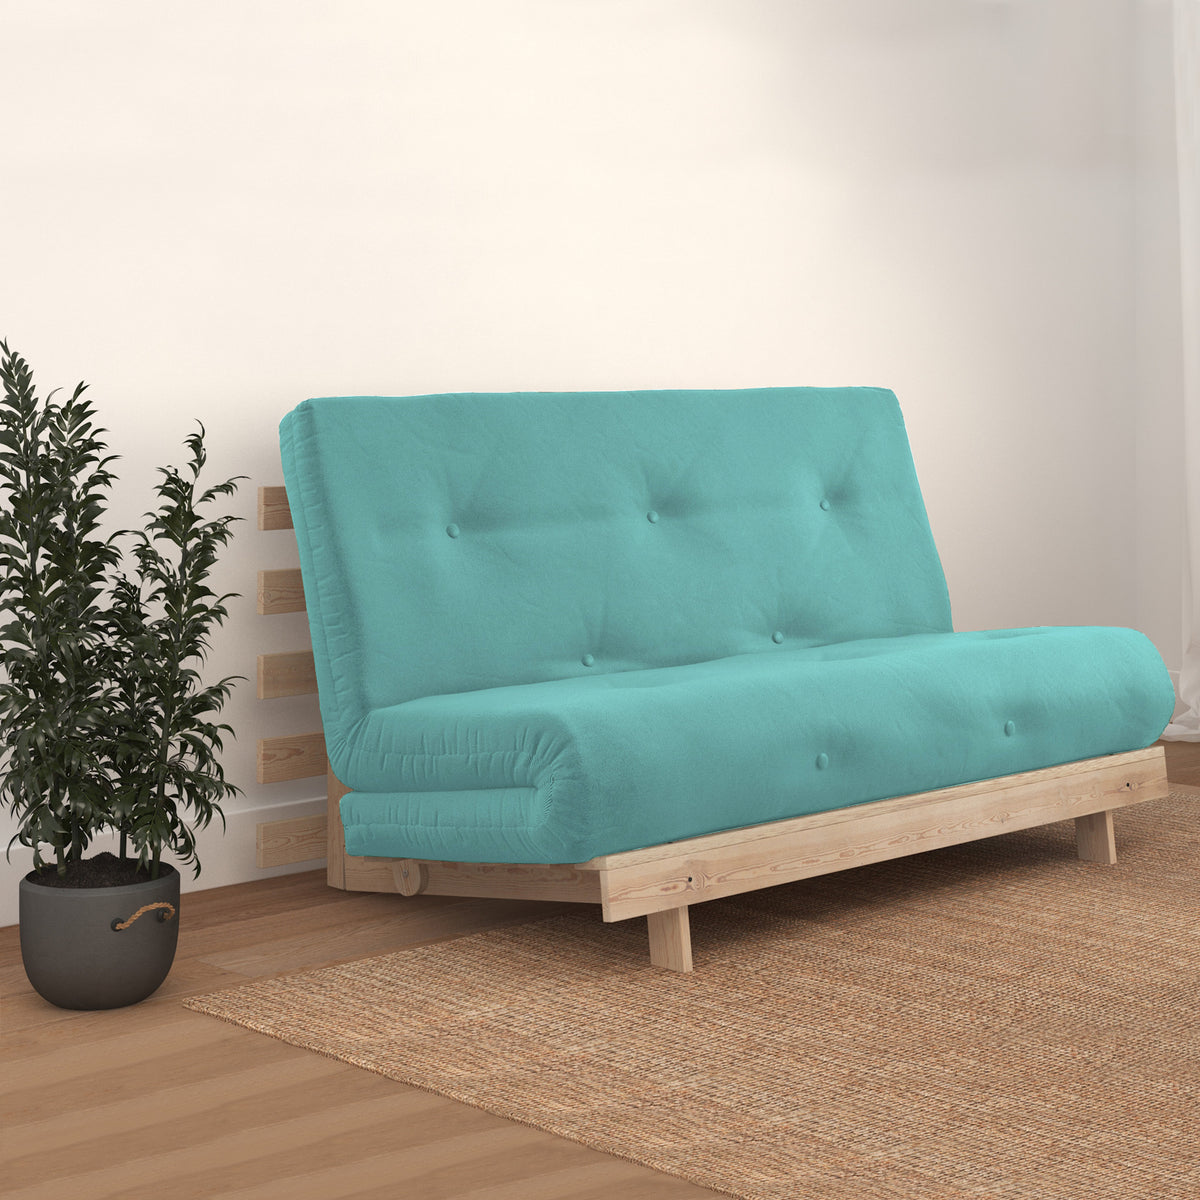 Maggie Teal Double Futon Sofa Bed for bedroom or living room